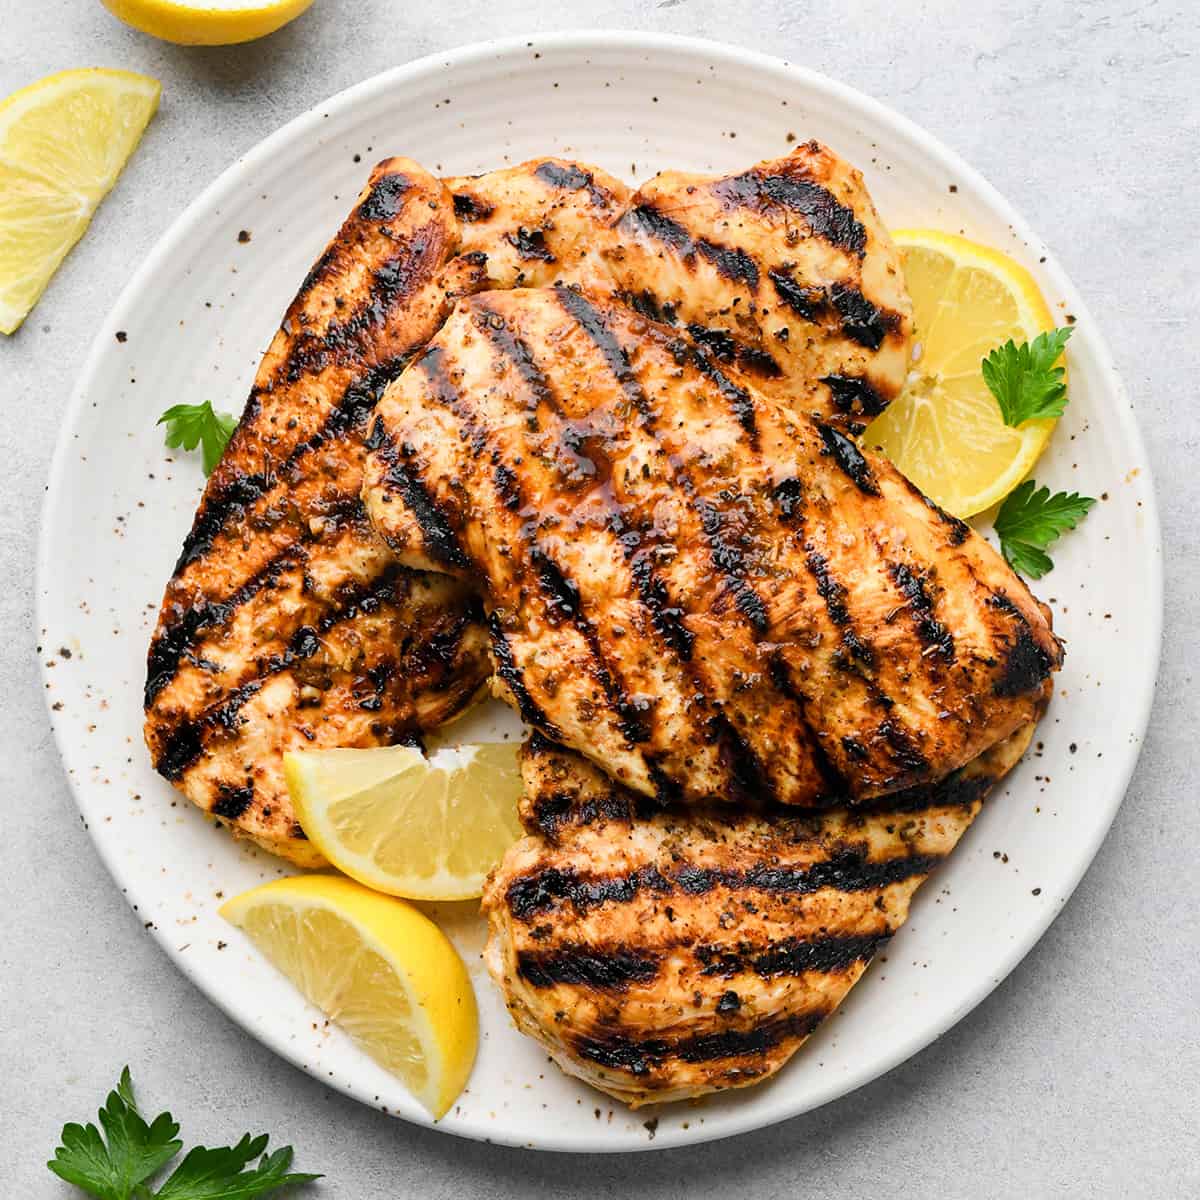 4 Greek chicken breasts on a plate with lemon